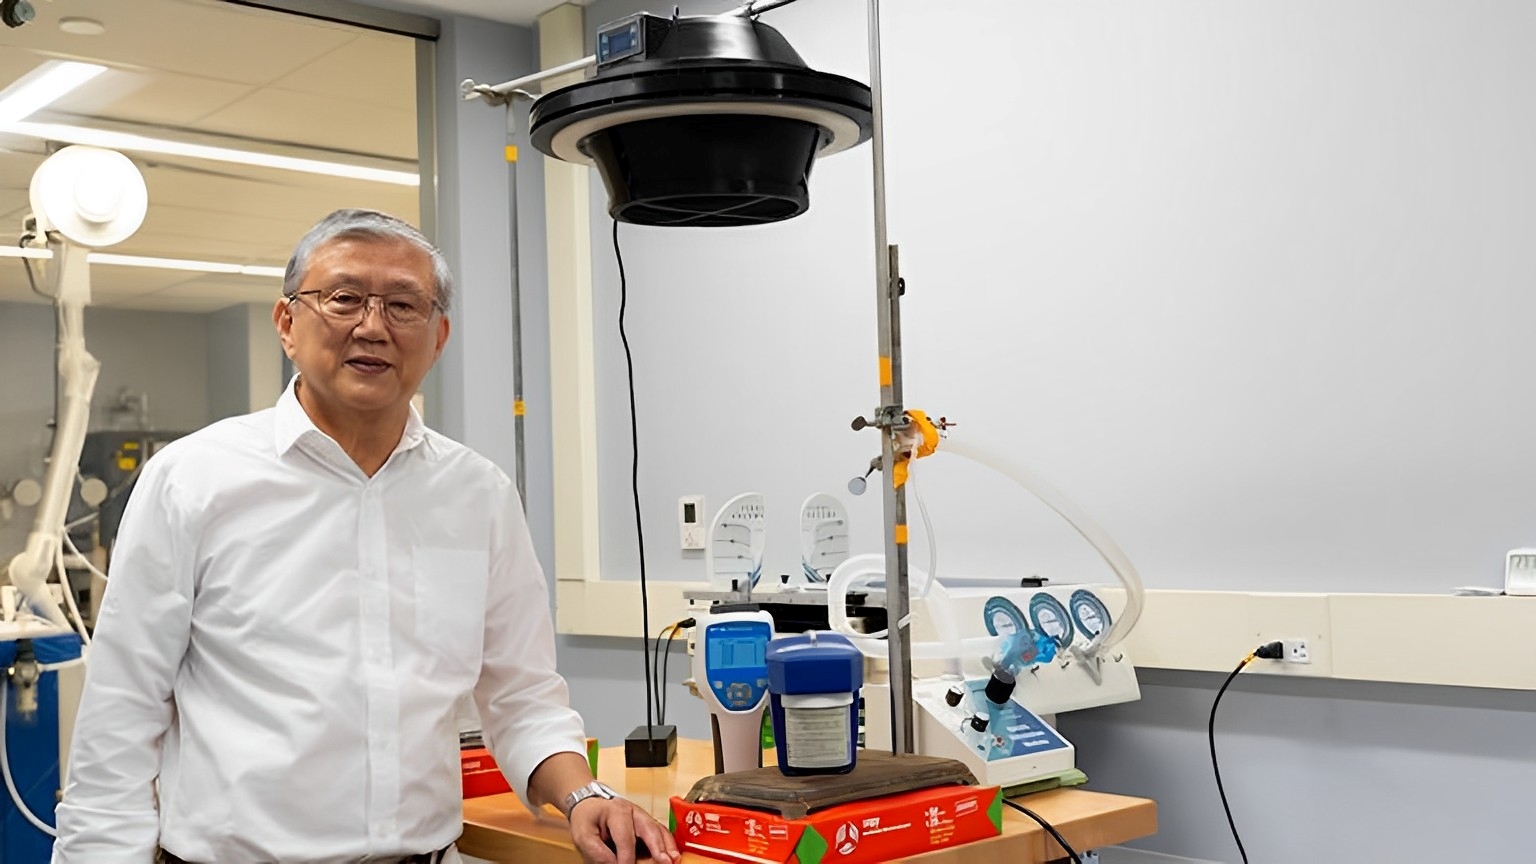 Chan Ching standing beside an air purification system.